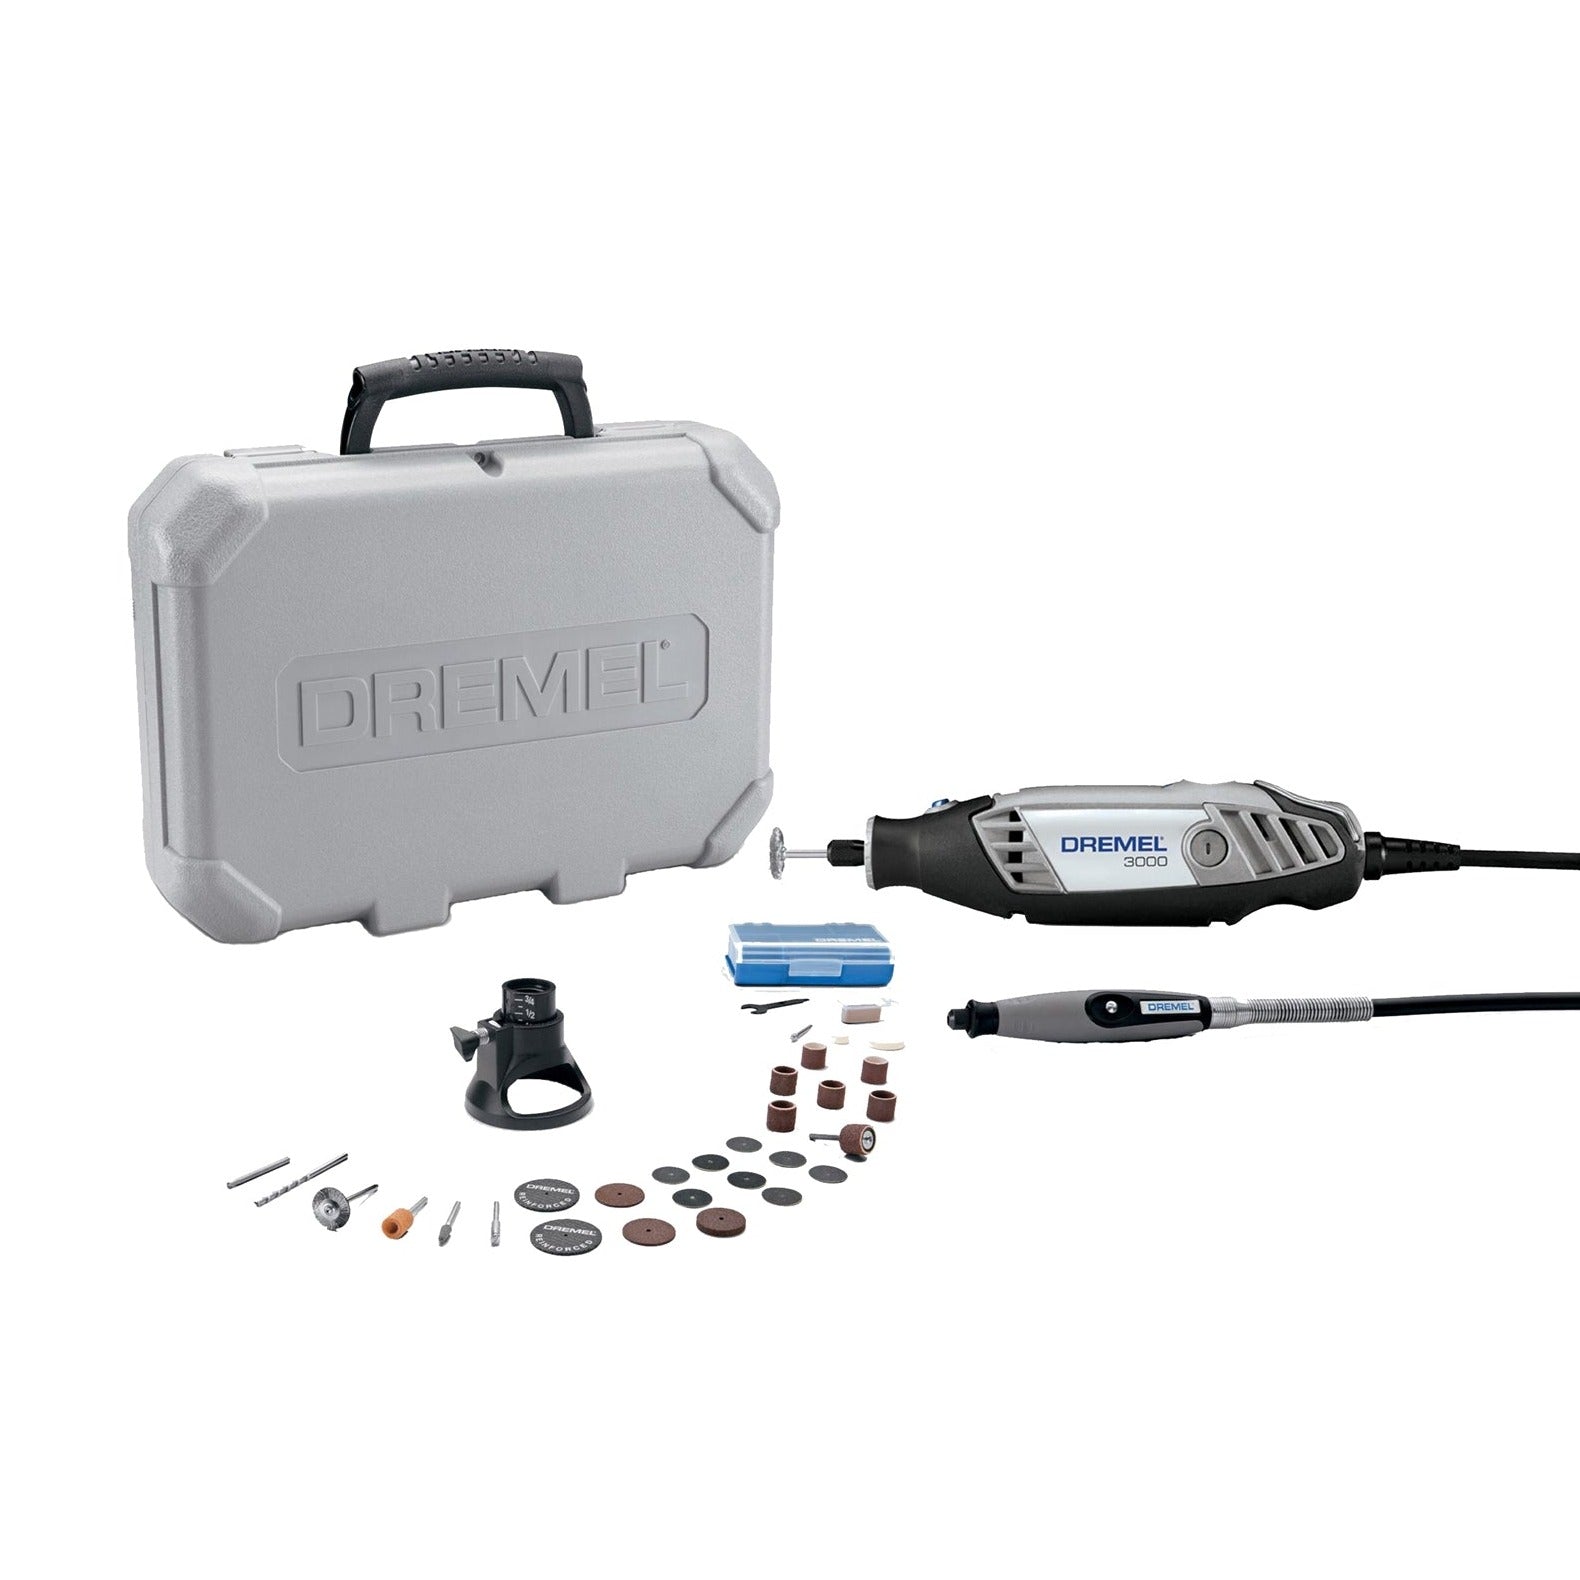 130W 30Pce + 2 Attachments Corded Rotary Tool Kit 3000-2/30 (F0133000PN) by Dremel